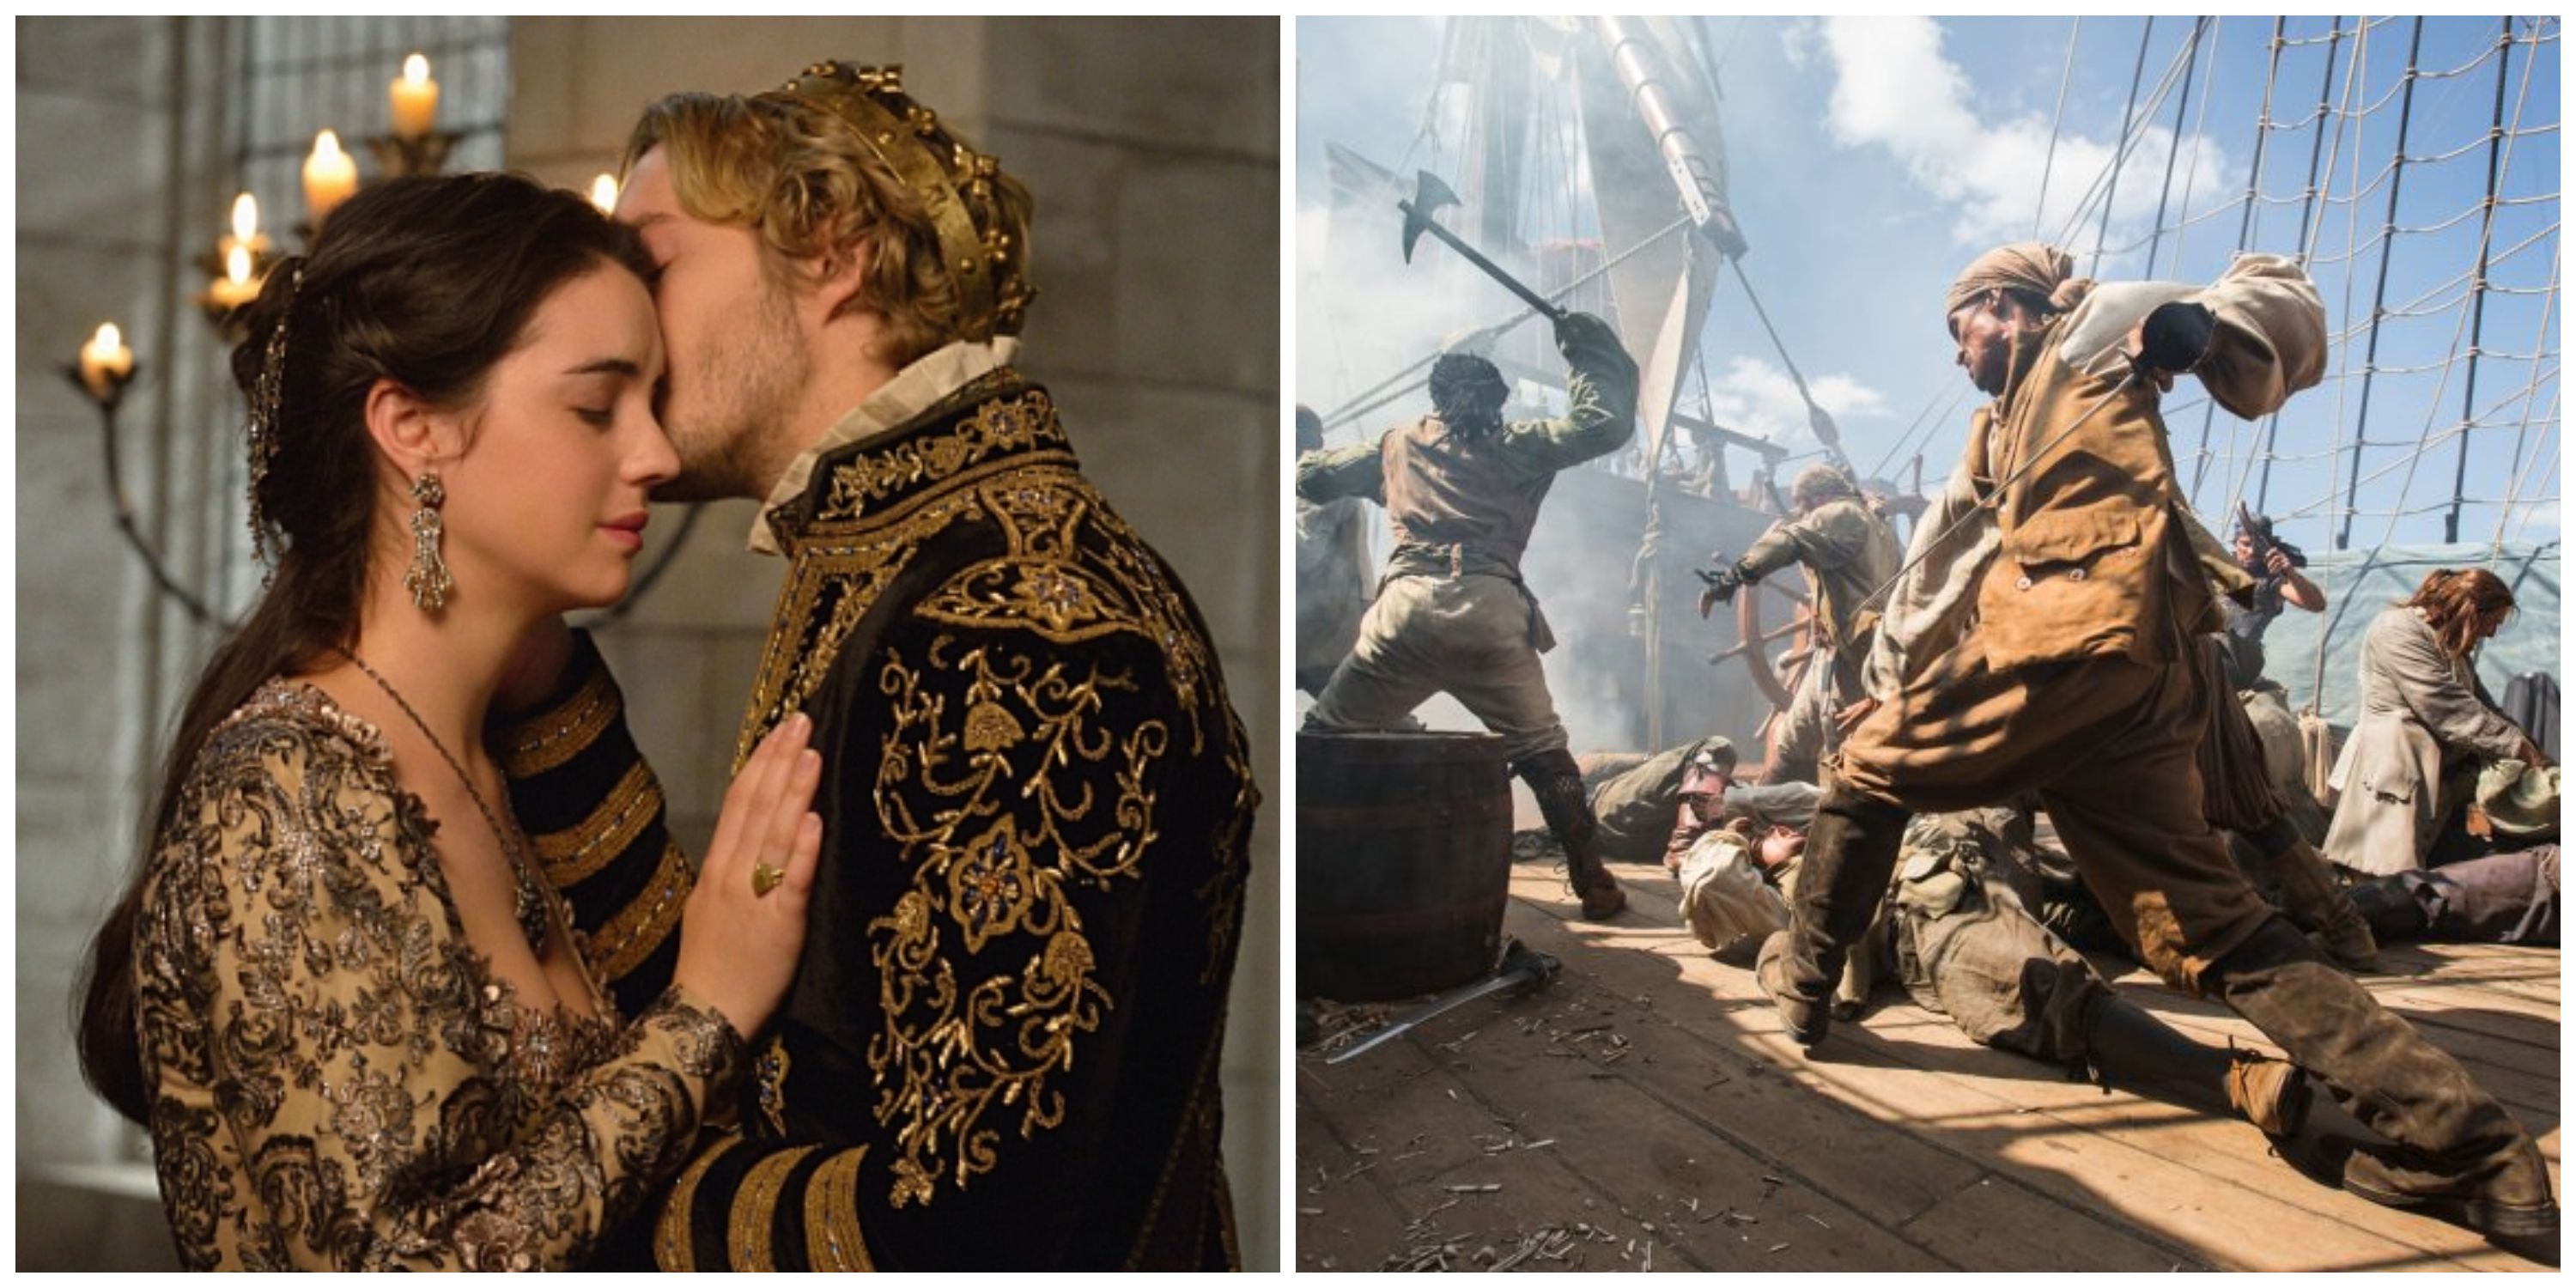 A split image of Mary and Francis in Reign and a pirate fight in Black Sails